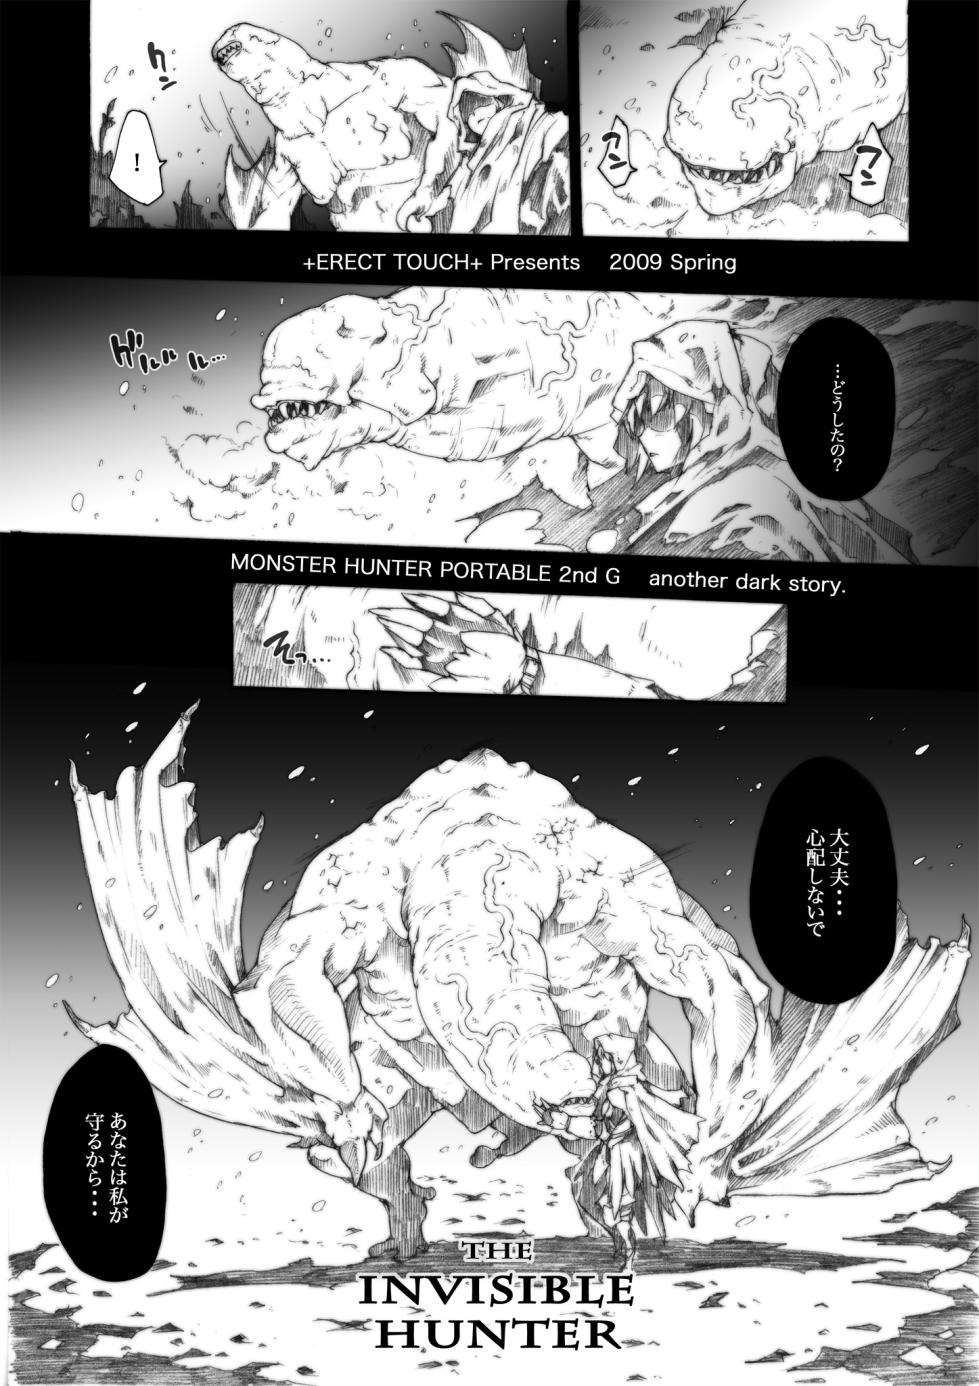 [ERECT TOUCH (Erect Sawaru)] Invisible Hunter Chronicle (Monster Hunter) [Digital] - Page 12